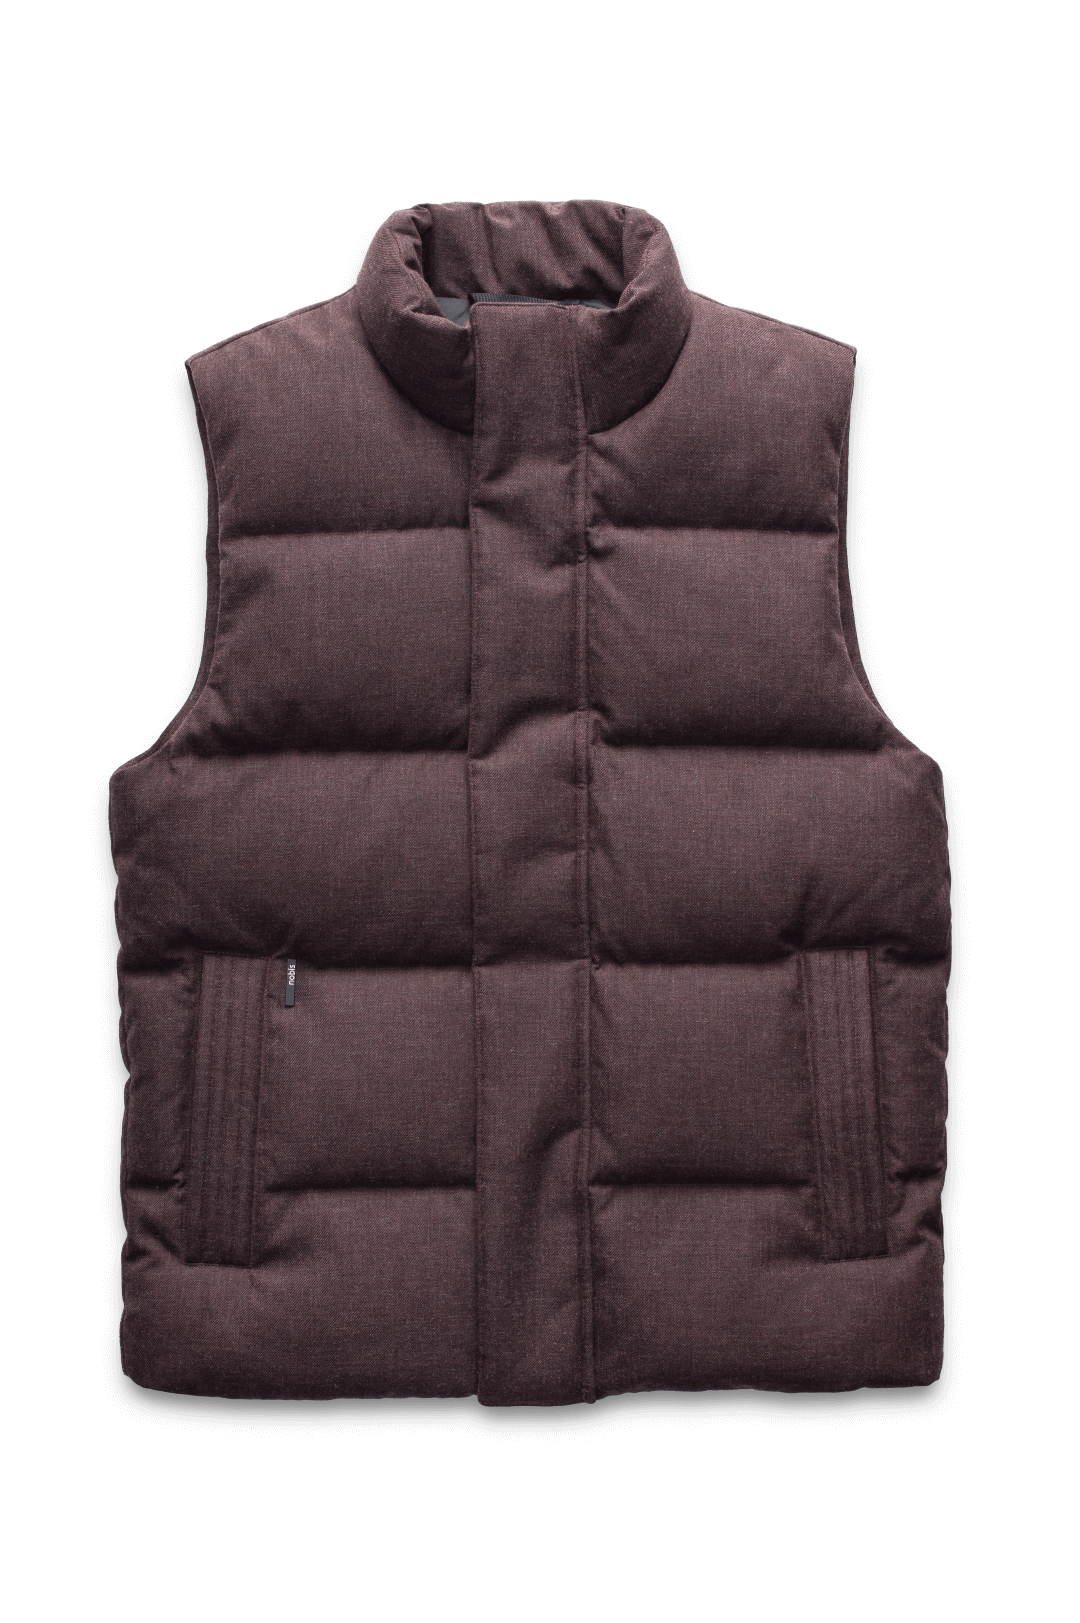 Vale Men's Quilted Vest in hip length, Canadian duck down insulation, and two-way zipper, in H. Burgundy